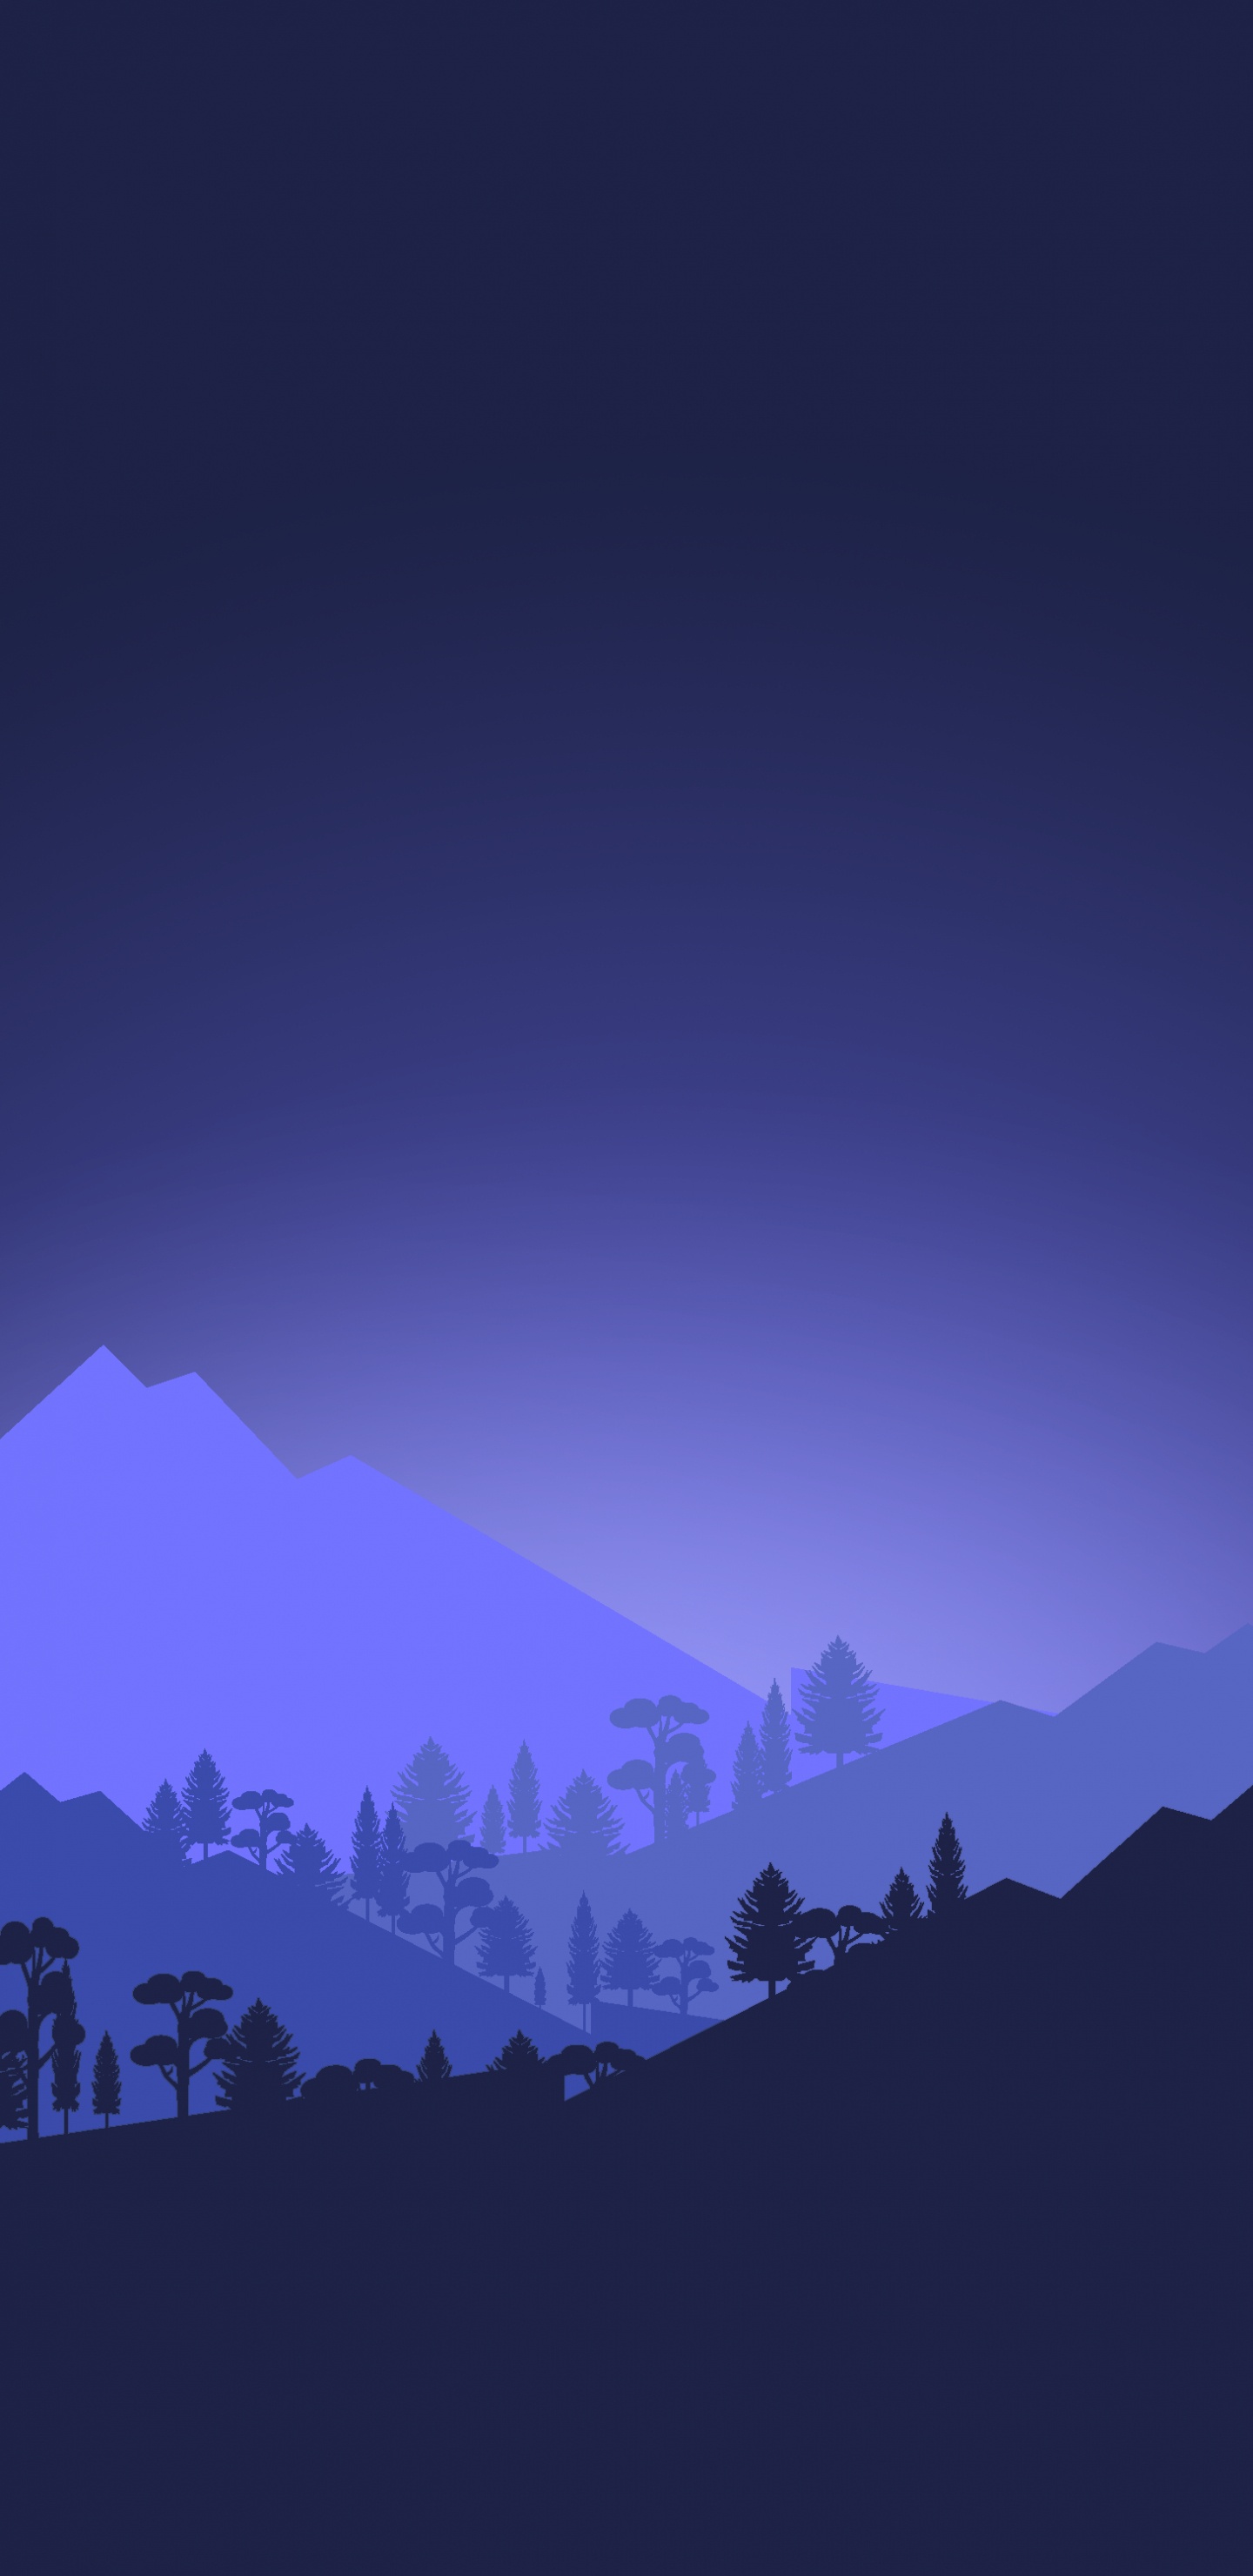 IOS, Smartphone, Apple, Atmosphère, Azure. Wallpaper in 1440x2960 Resolution